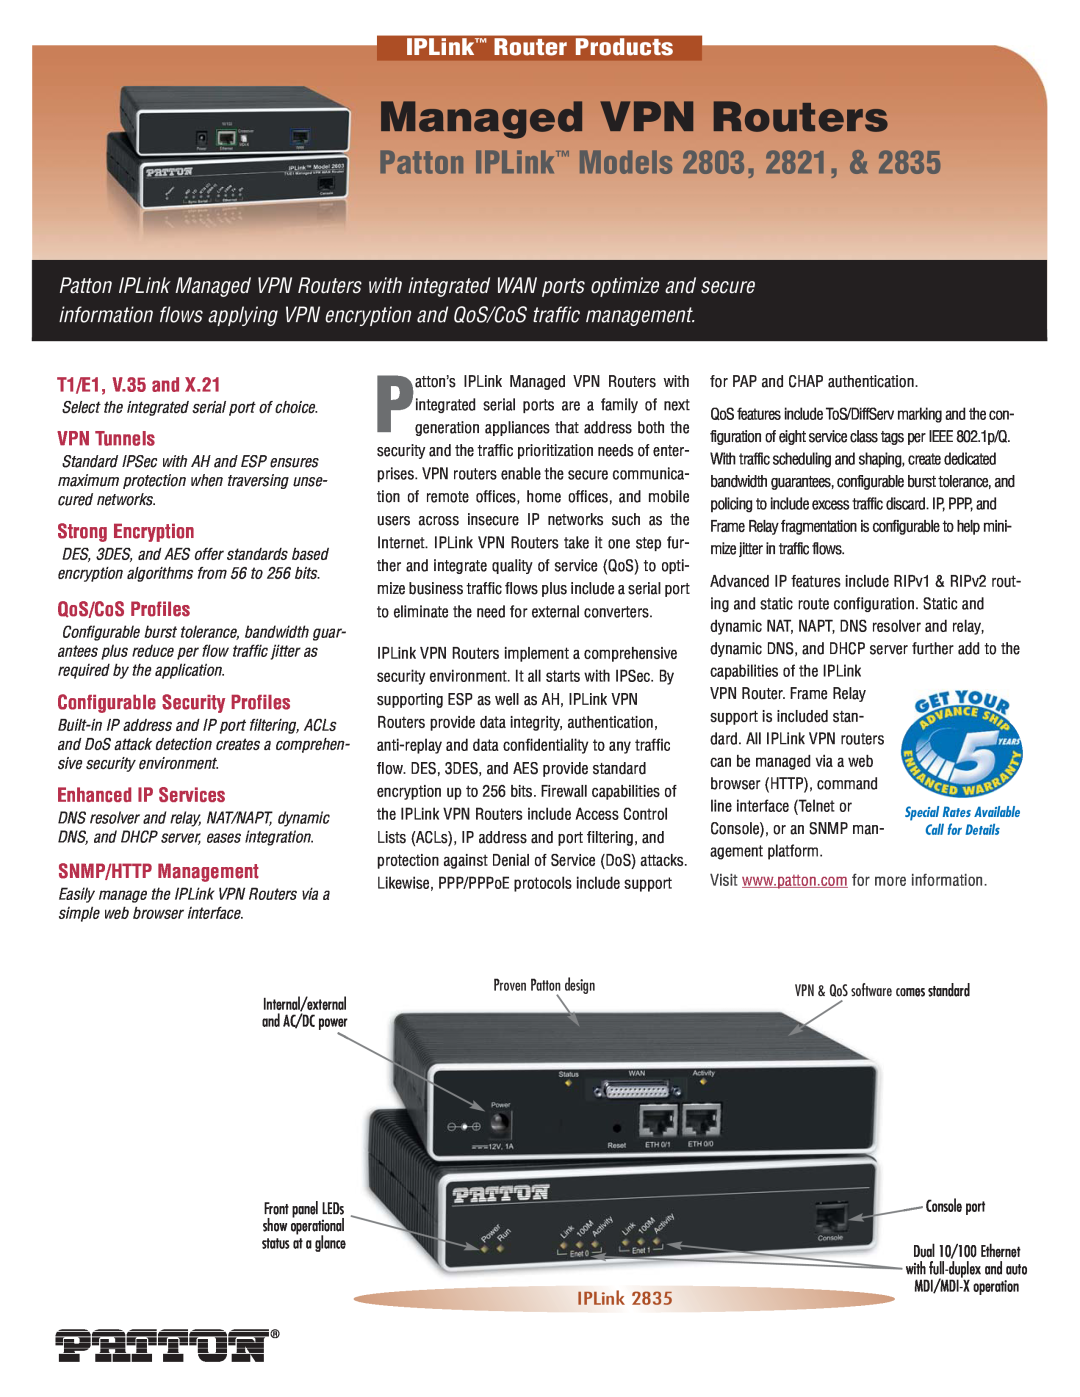 Patton electronic 2835 manual to eliminate the need for external converters, Proven Patton design, Managed VPN Routers 